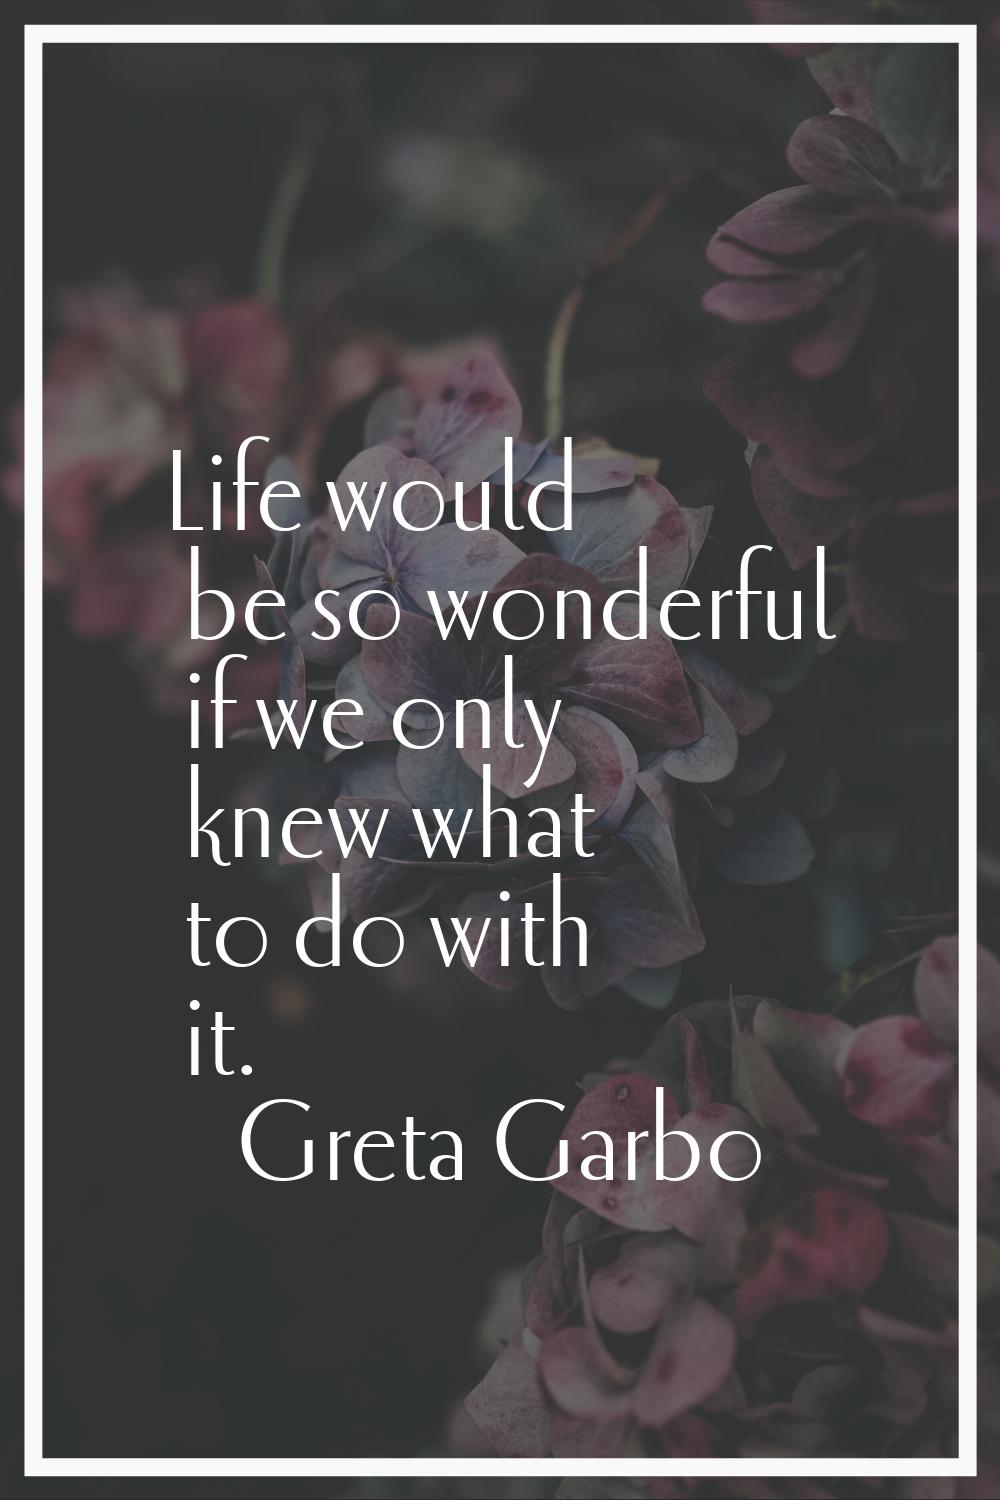 Life would be so wonderful if we only knew what to do with it.